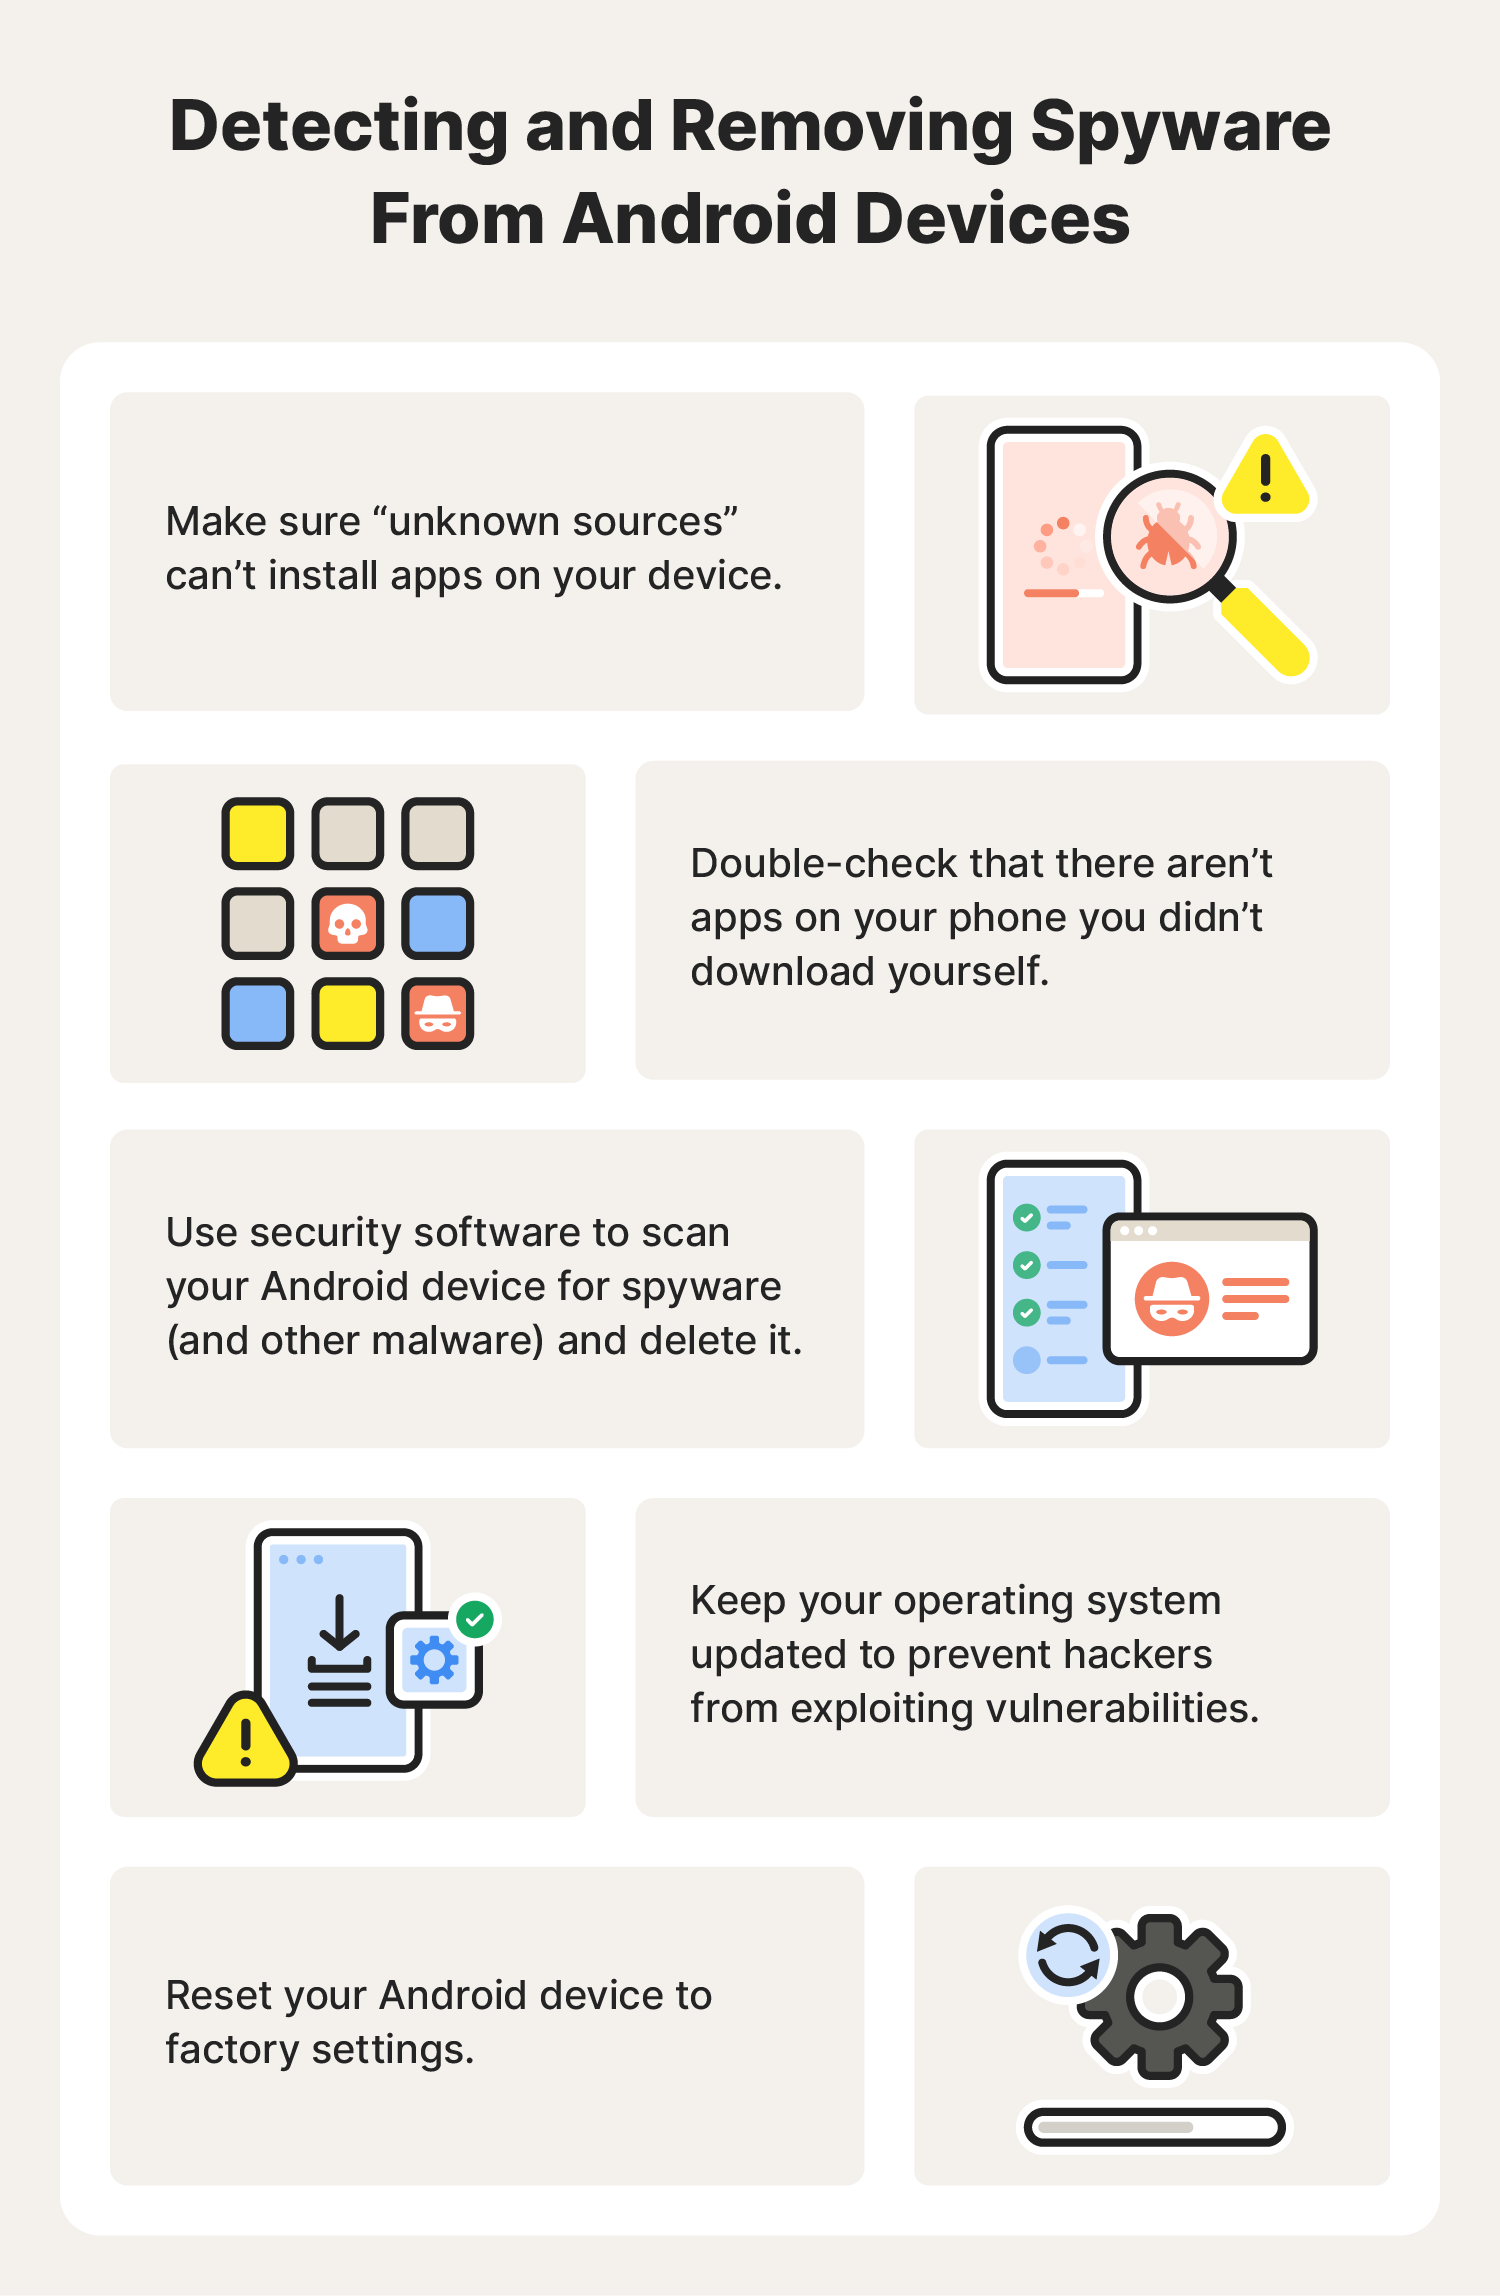 Illustrated chart with tips for detecting and removing spyware from Android devices.